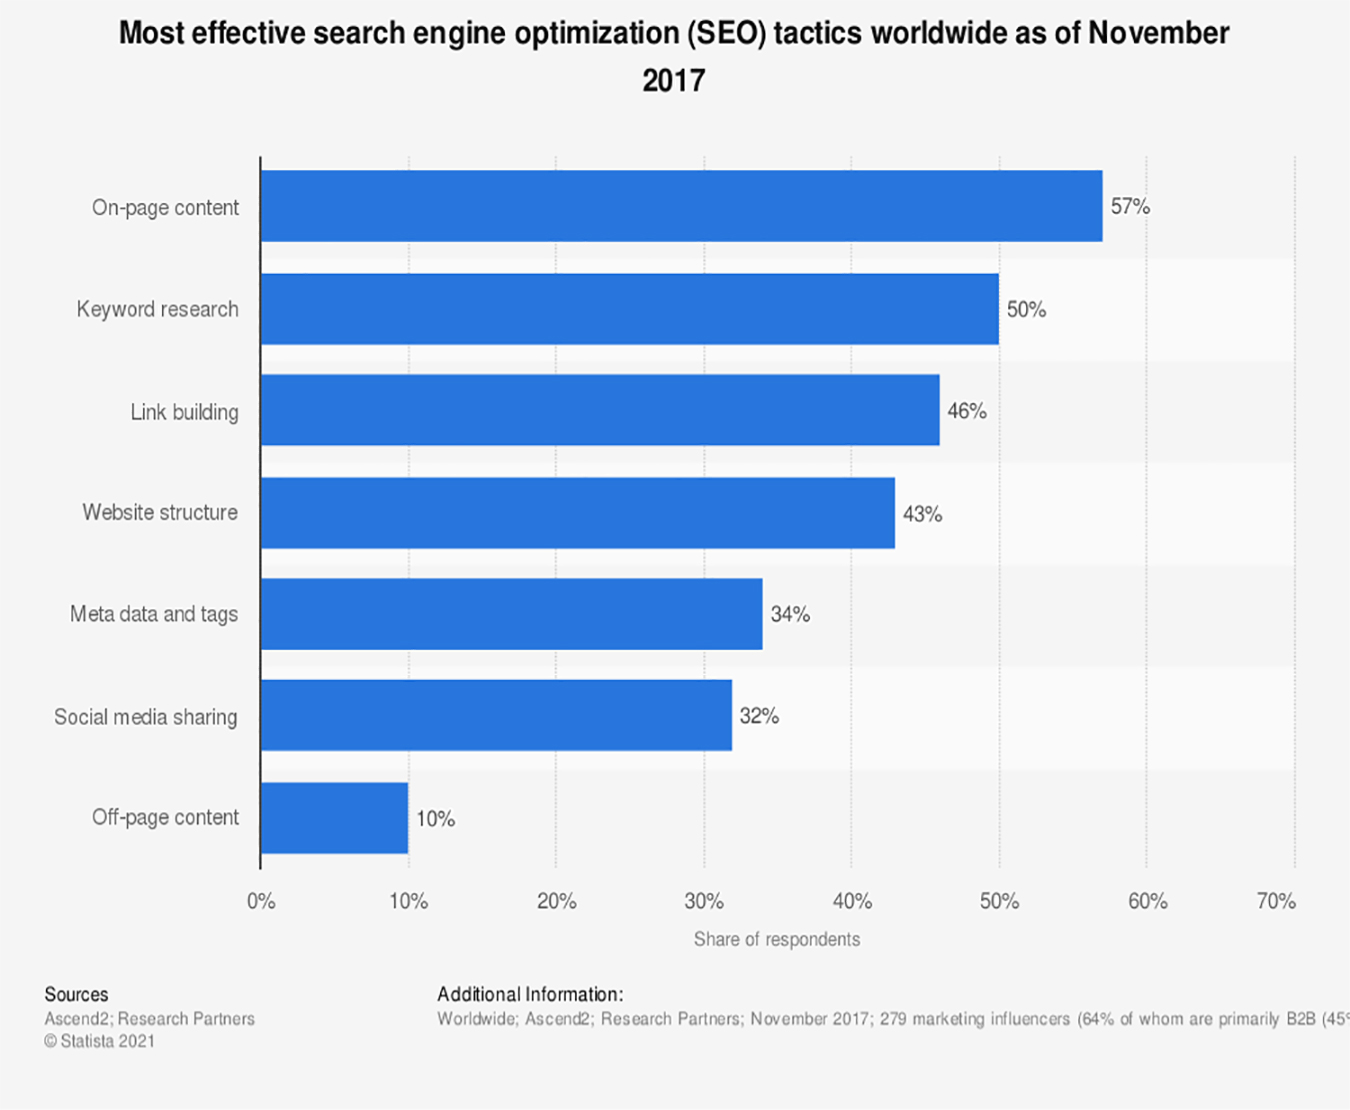 SEO Best Practices for Manufacturing. The graph shows the most effective search engine optimization (SEO) tactics worldwide as of November 2017. During the survey, the follower percentage of respondents chose each item as "most effective": 57% chose on-page content; 50% chose keyword research; 46% chose link building; 43% chose website structure; 34% chose meta data and tags; and 32 percent of responding marketers stated that social media sharing was the most effective SEO tactic. Worldwide; Ascend2; Research Partners; November 2017; 279 marketing influencers (64% of whom are primarily B2B (45%) or B2B and B2C equally (19%))